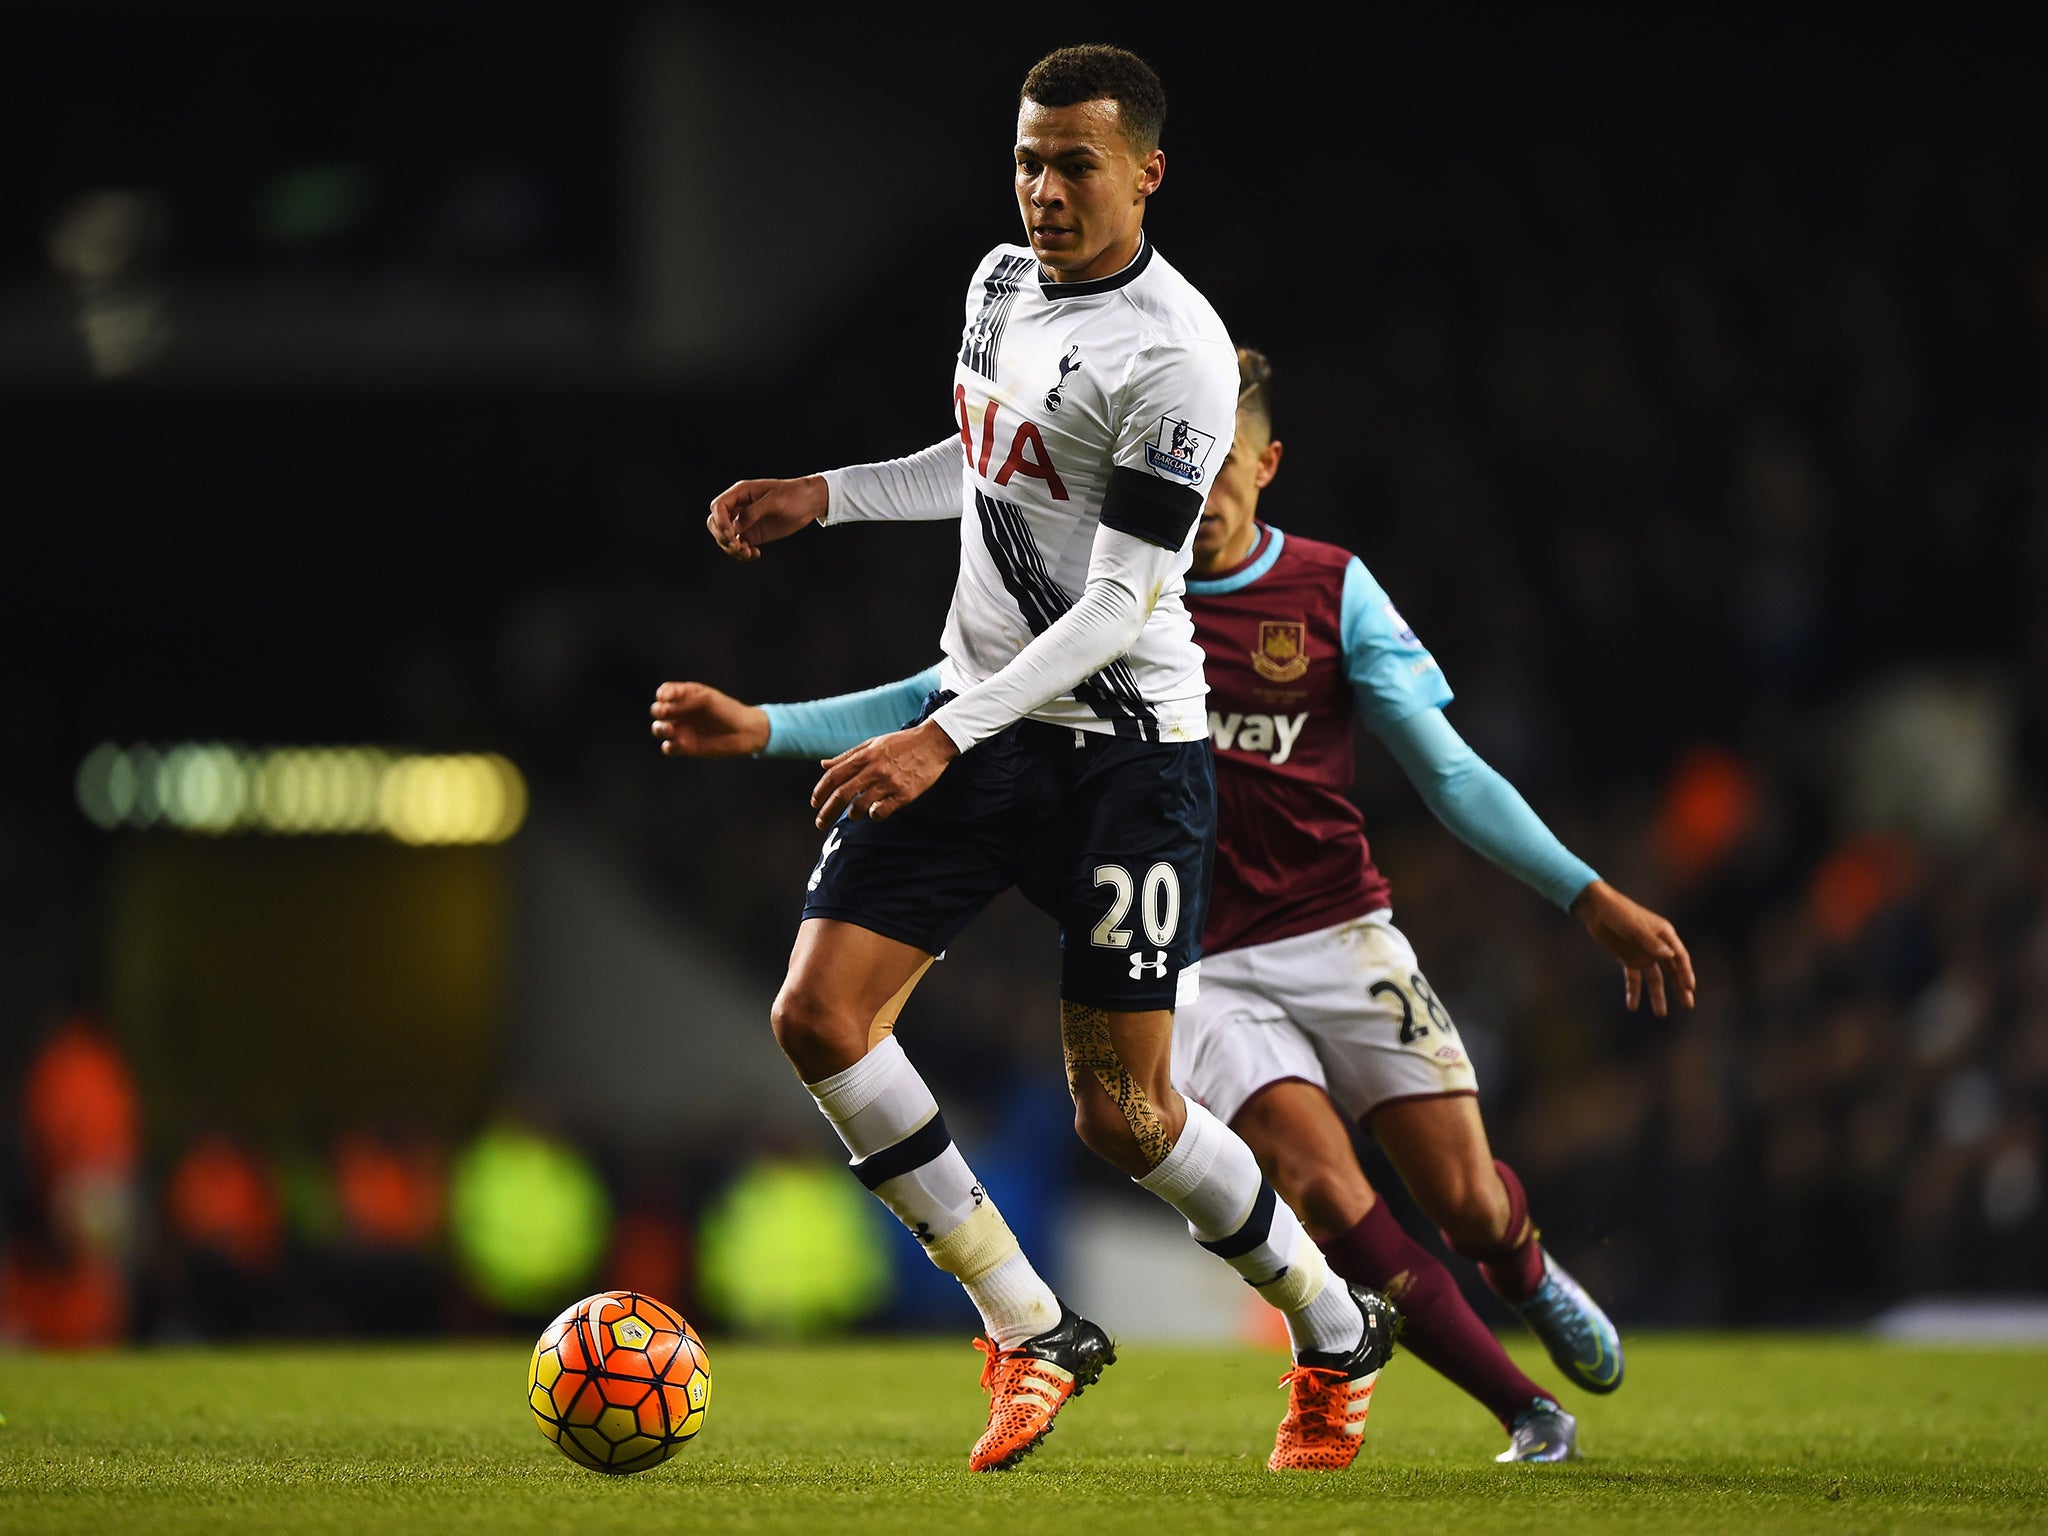 Alli has been a mainstay of Spurs's first-team since being given his debut by Mauricio Pochettino